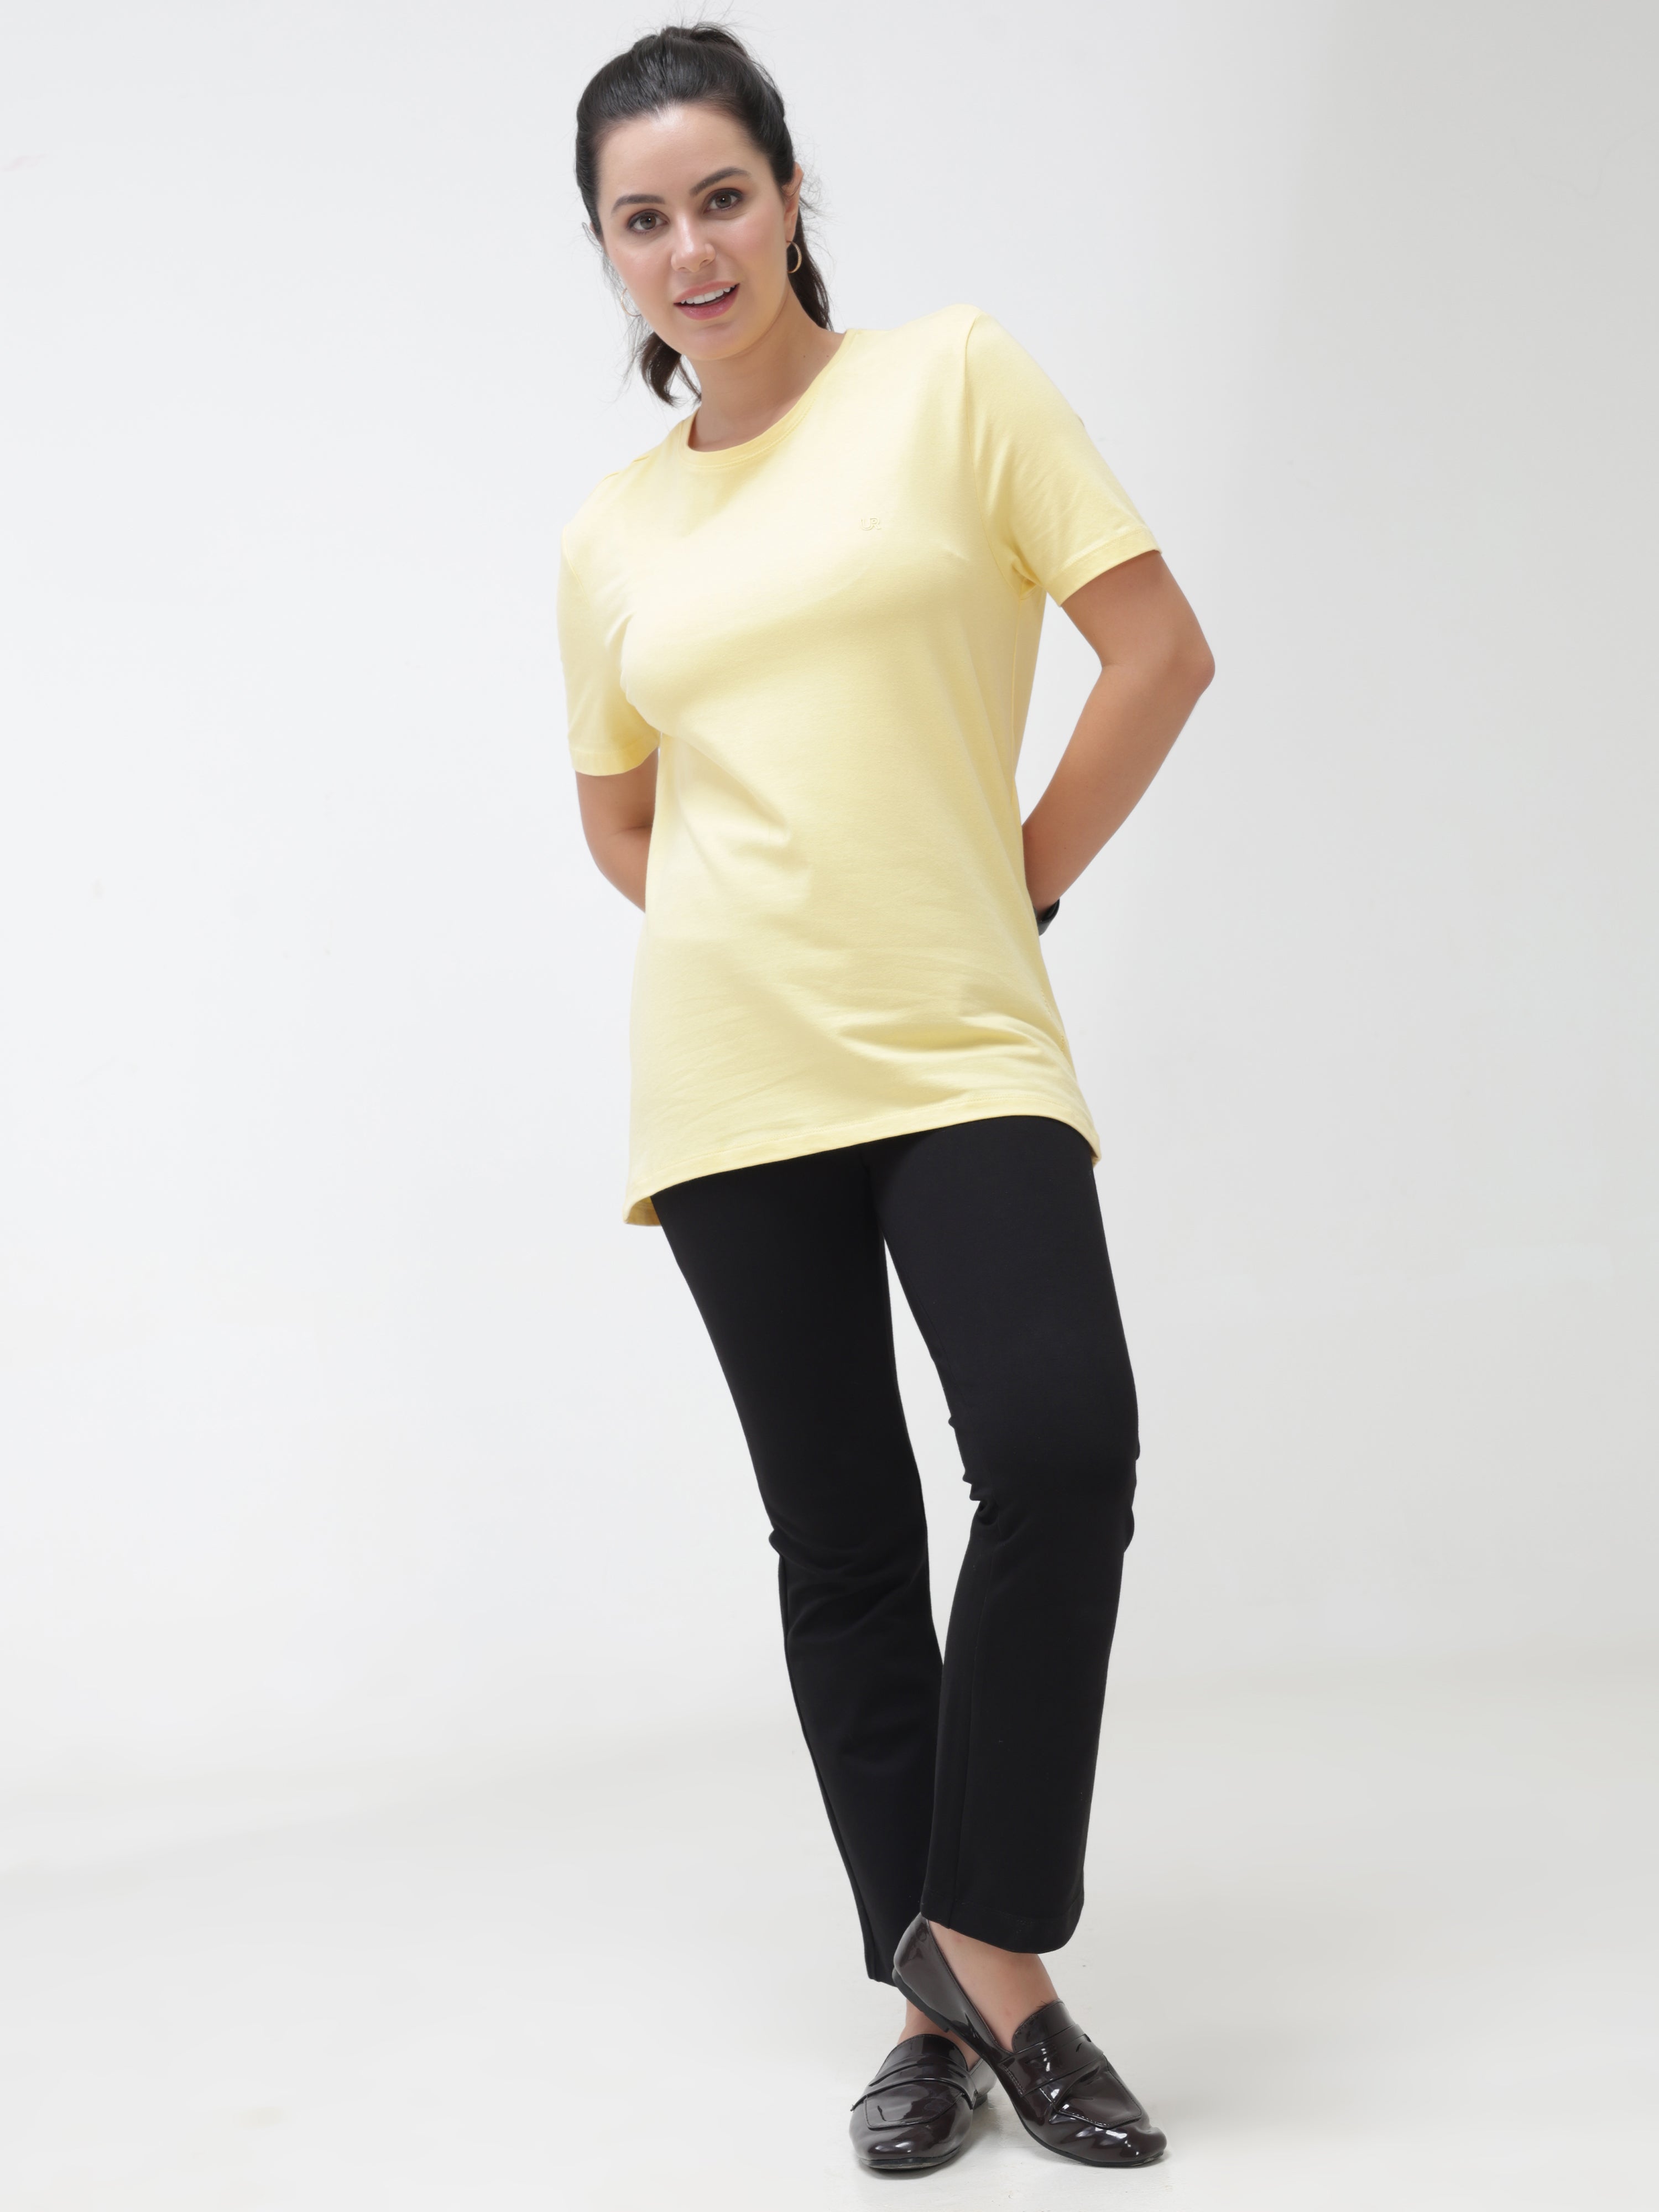 Woman wearing a yellow, round-neck T-shirt paired with black pants from Turms, showcasing trendy, stylish casual wear for women.